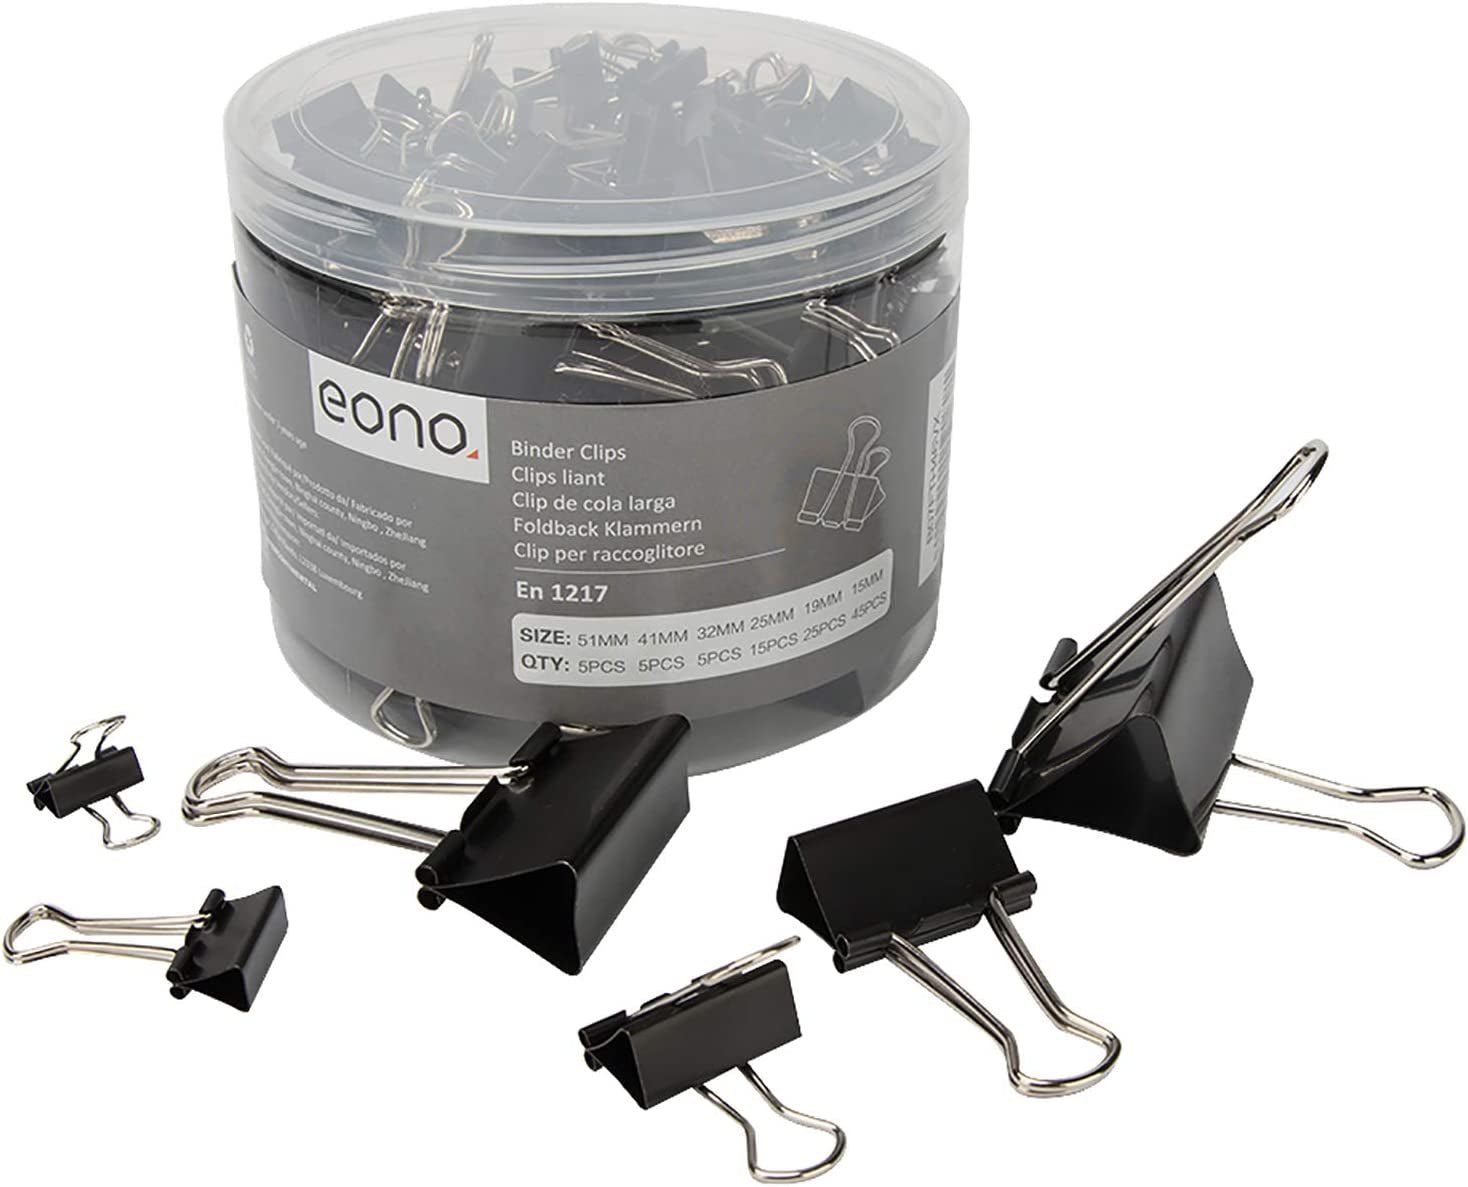 http://www.foxmart.co.uk/cdn/shop/products/amazon-brand-eono-black-binder-clips-100pcs-assorted-size-foldback-metal-binder-paper-clamps-for-paperwork-extra-small-medium-large-6-sizes-51mm-41mm-32mm-25mm--655021.jpg?v=1678479547